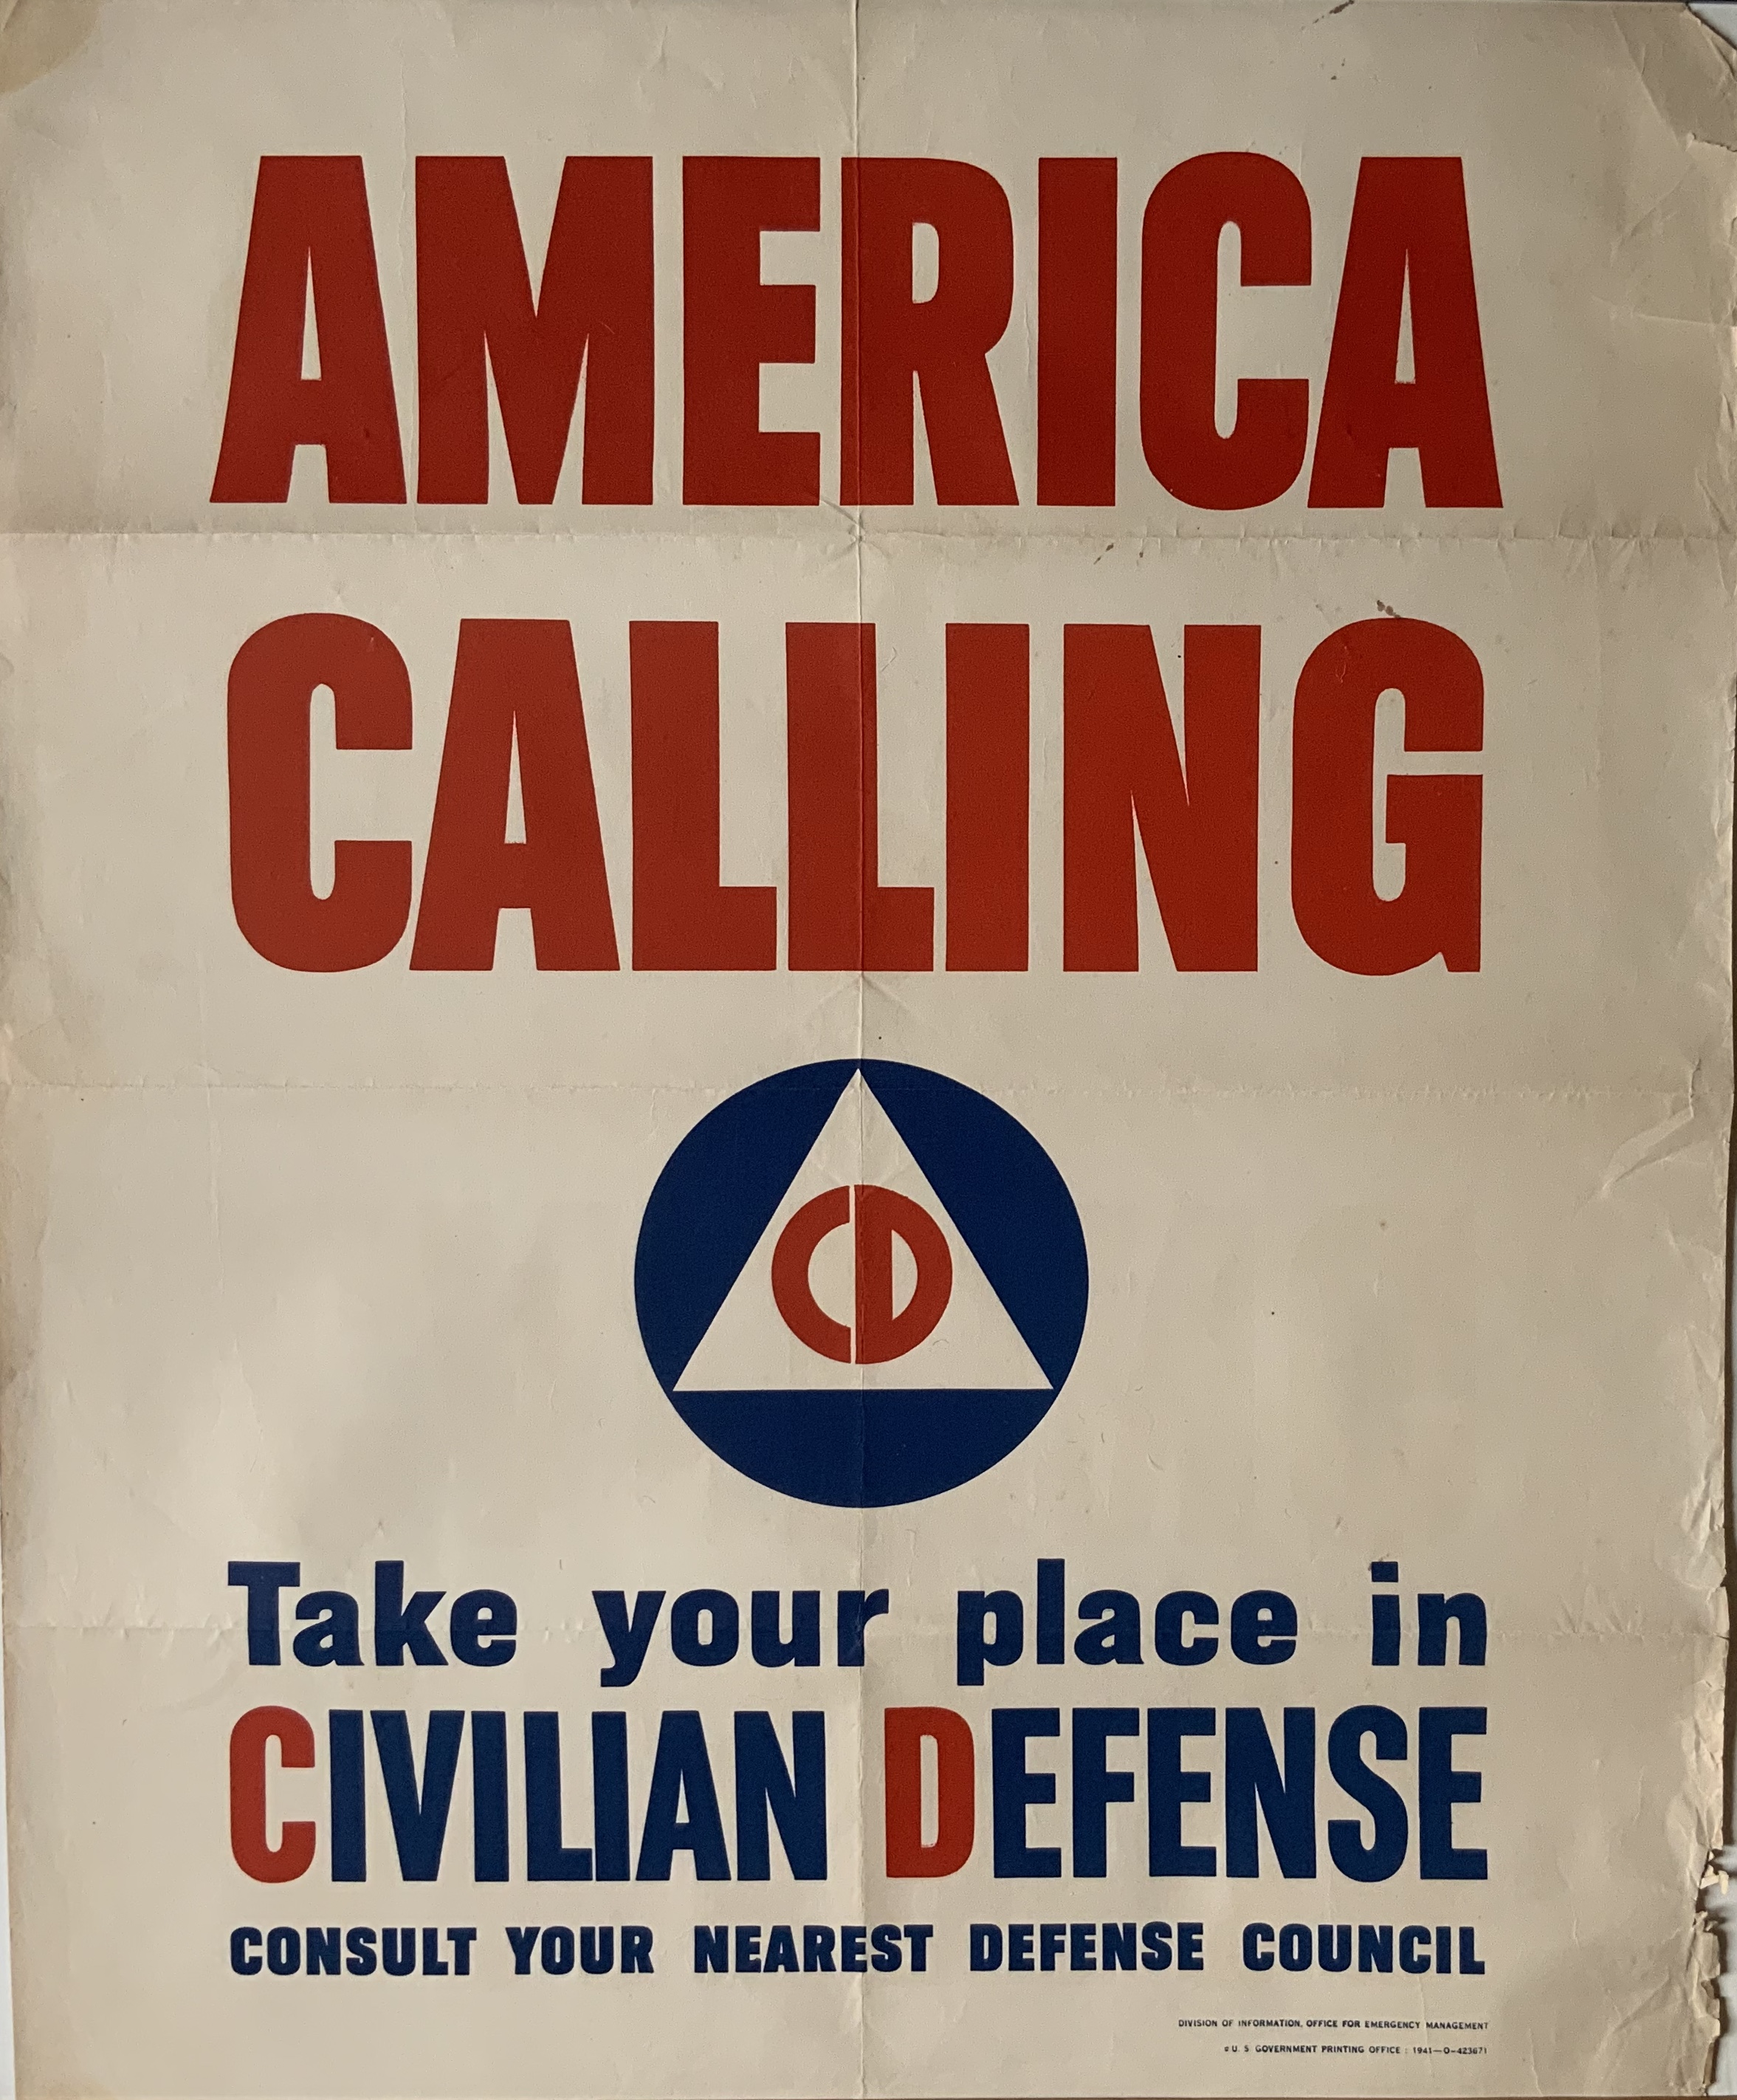 J579	AMERICA CALLING - TAKE YOUR PLACE IN CIVILIAN DEFENSE